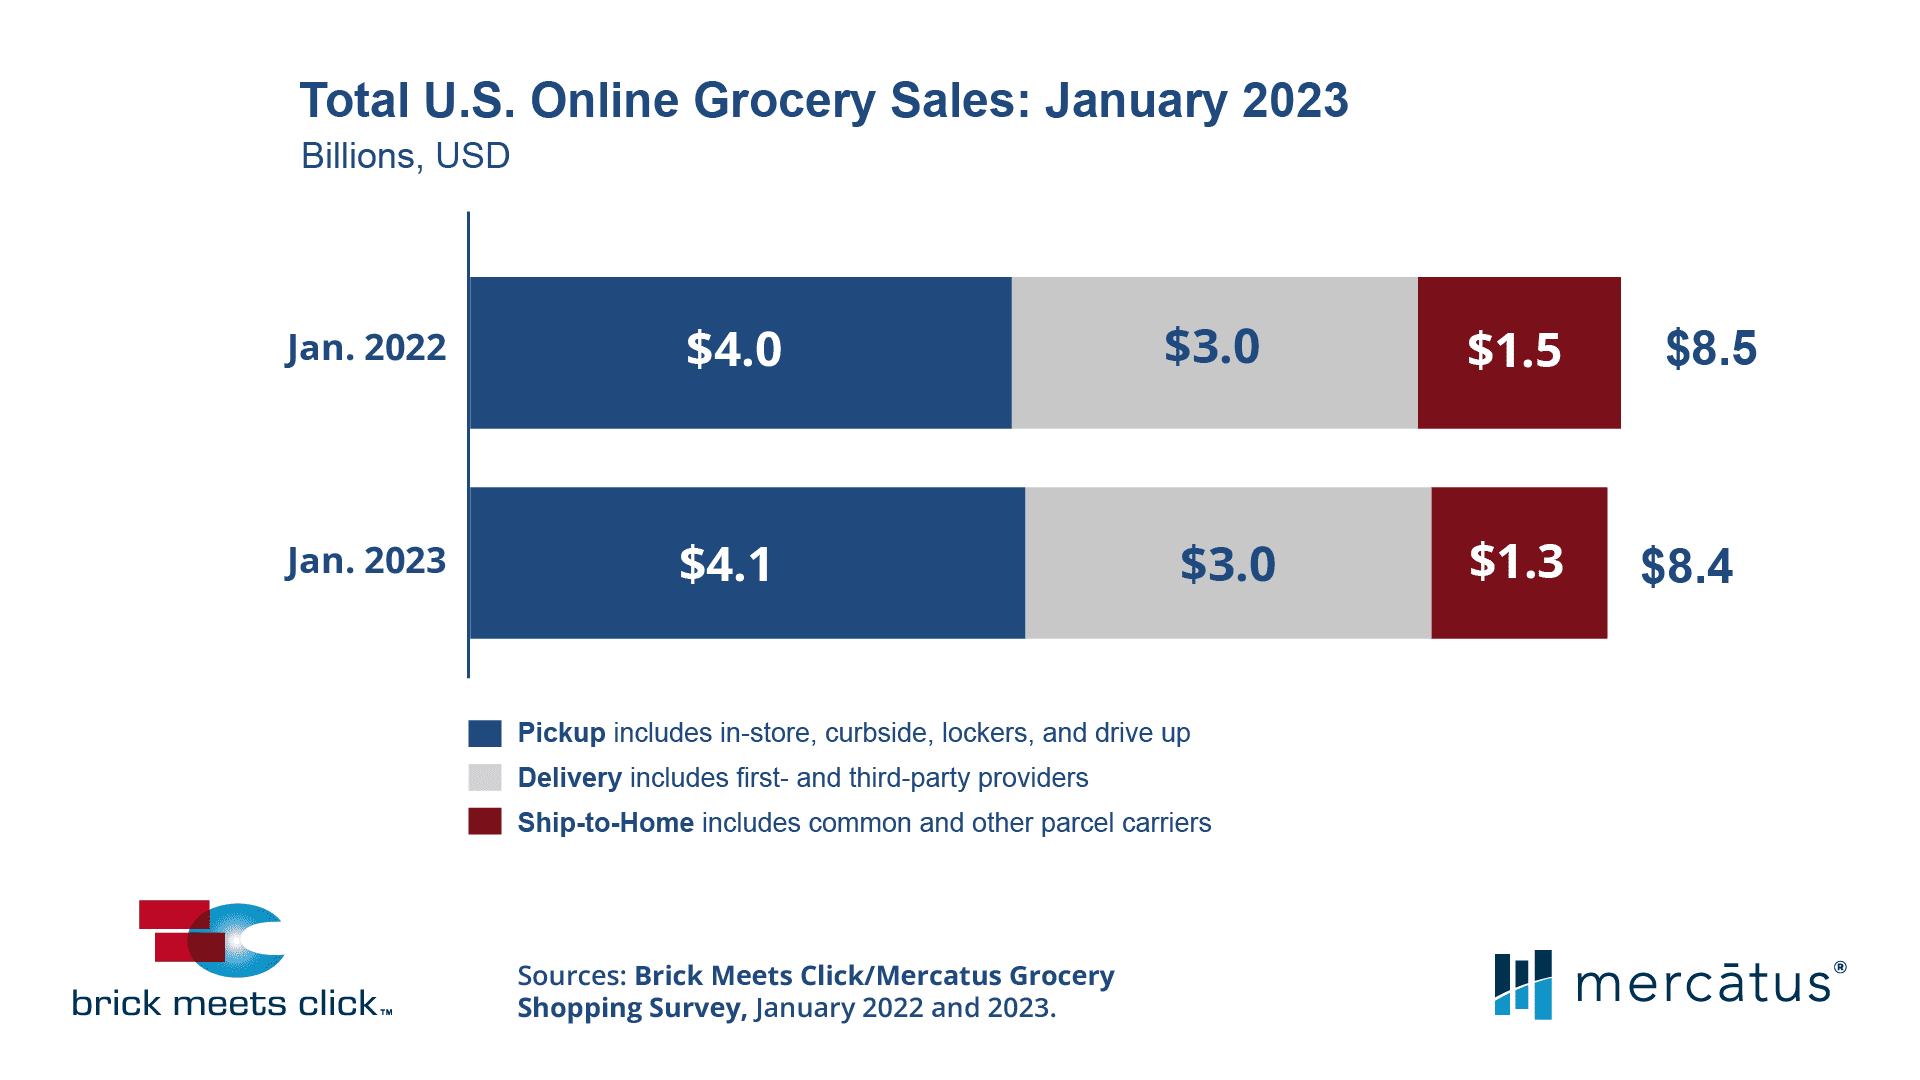 Total US Online Grocery Sales January 2023